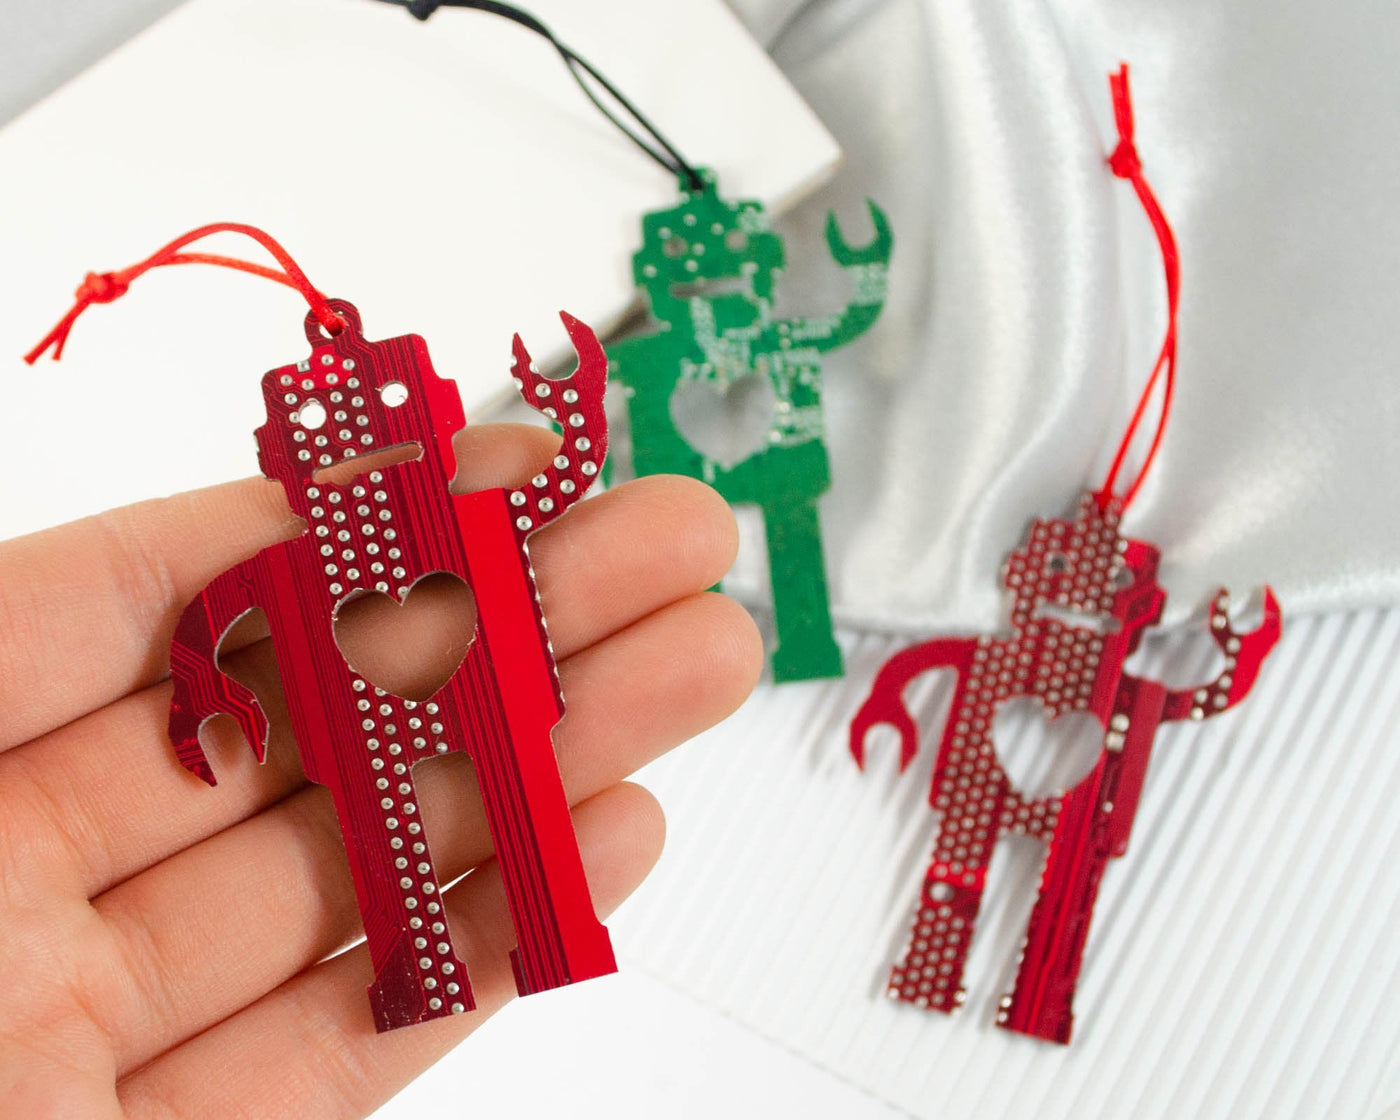 handmade robot ornaments made from recycled circuit boards